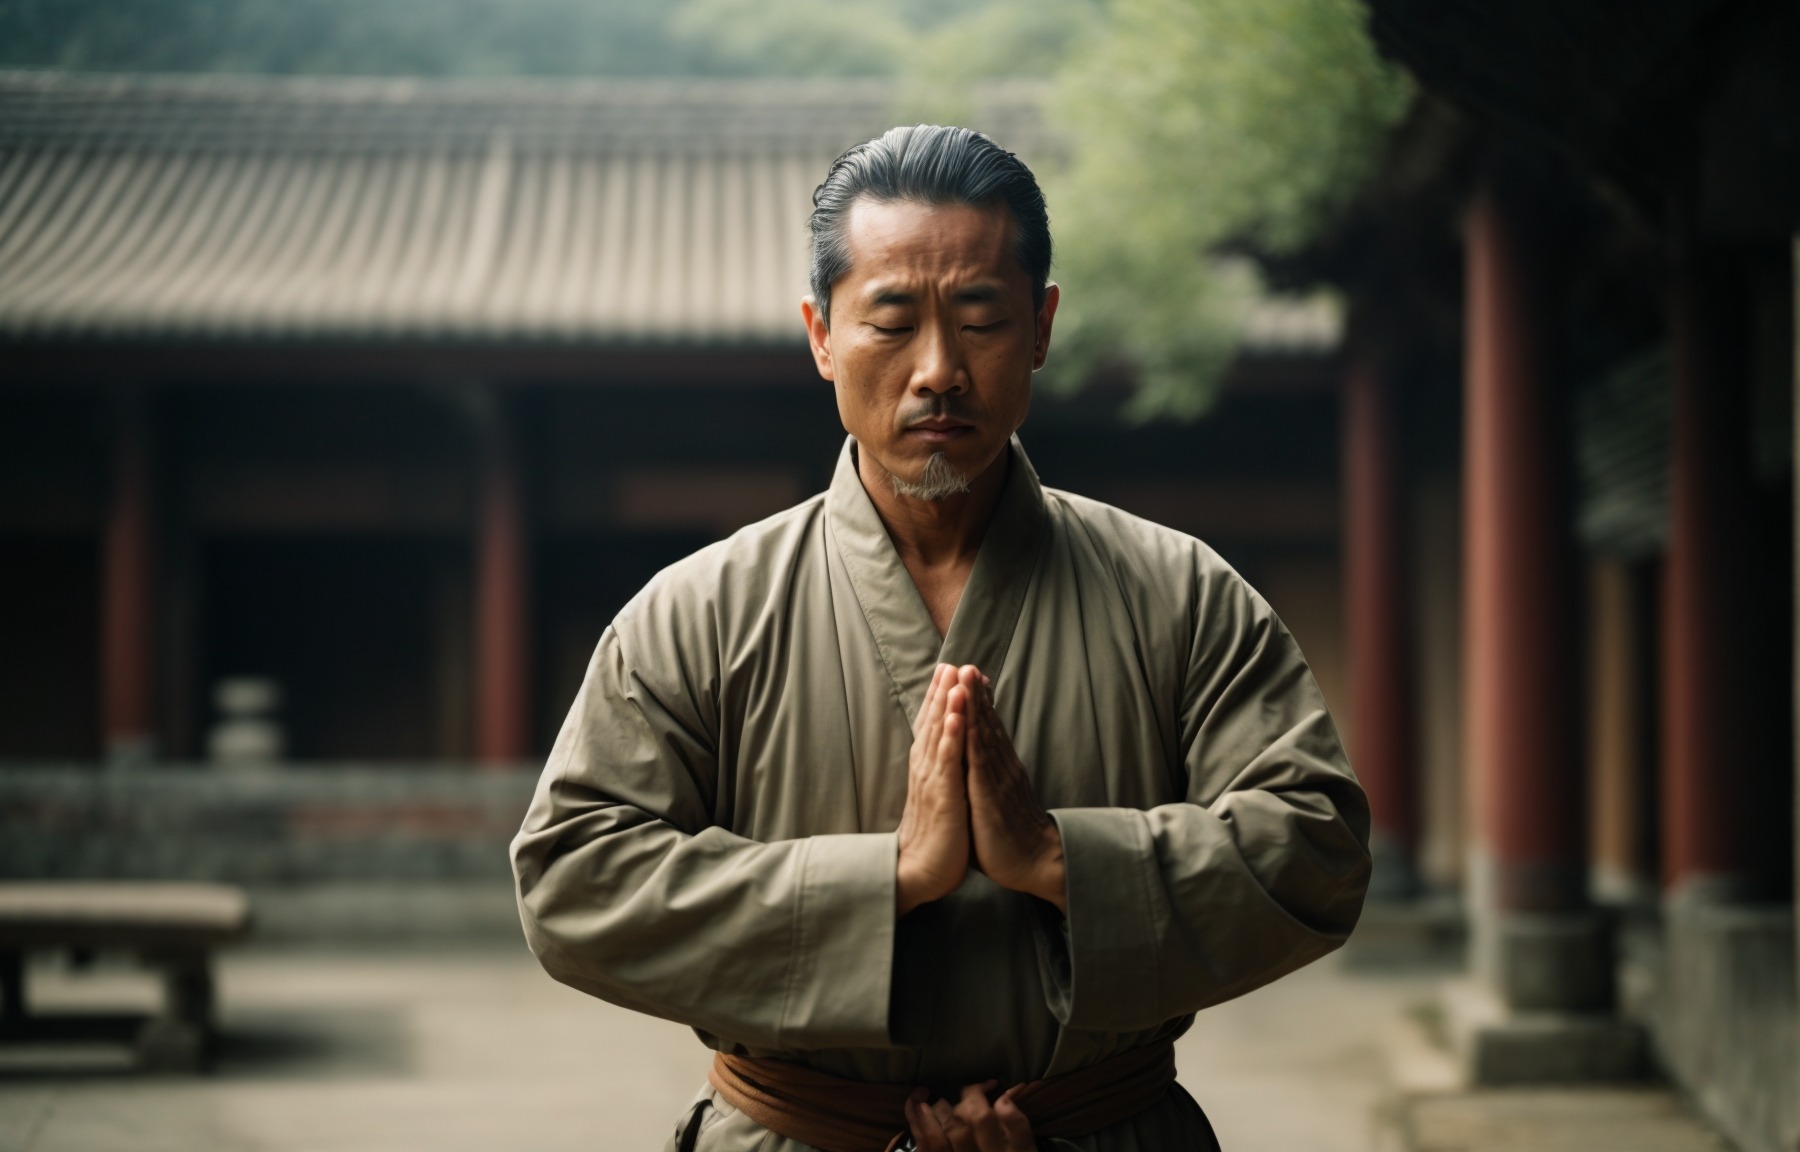 Self-Discovery and Personal Growth with Qigong